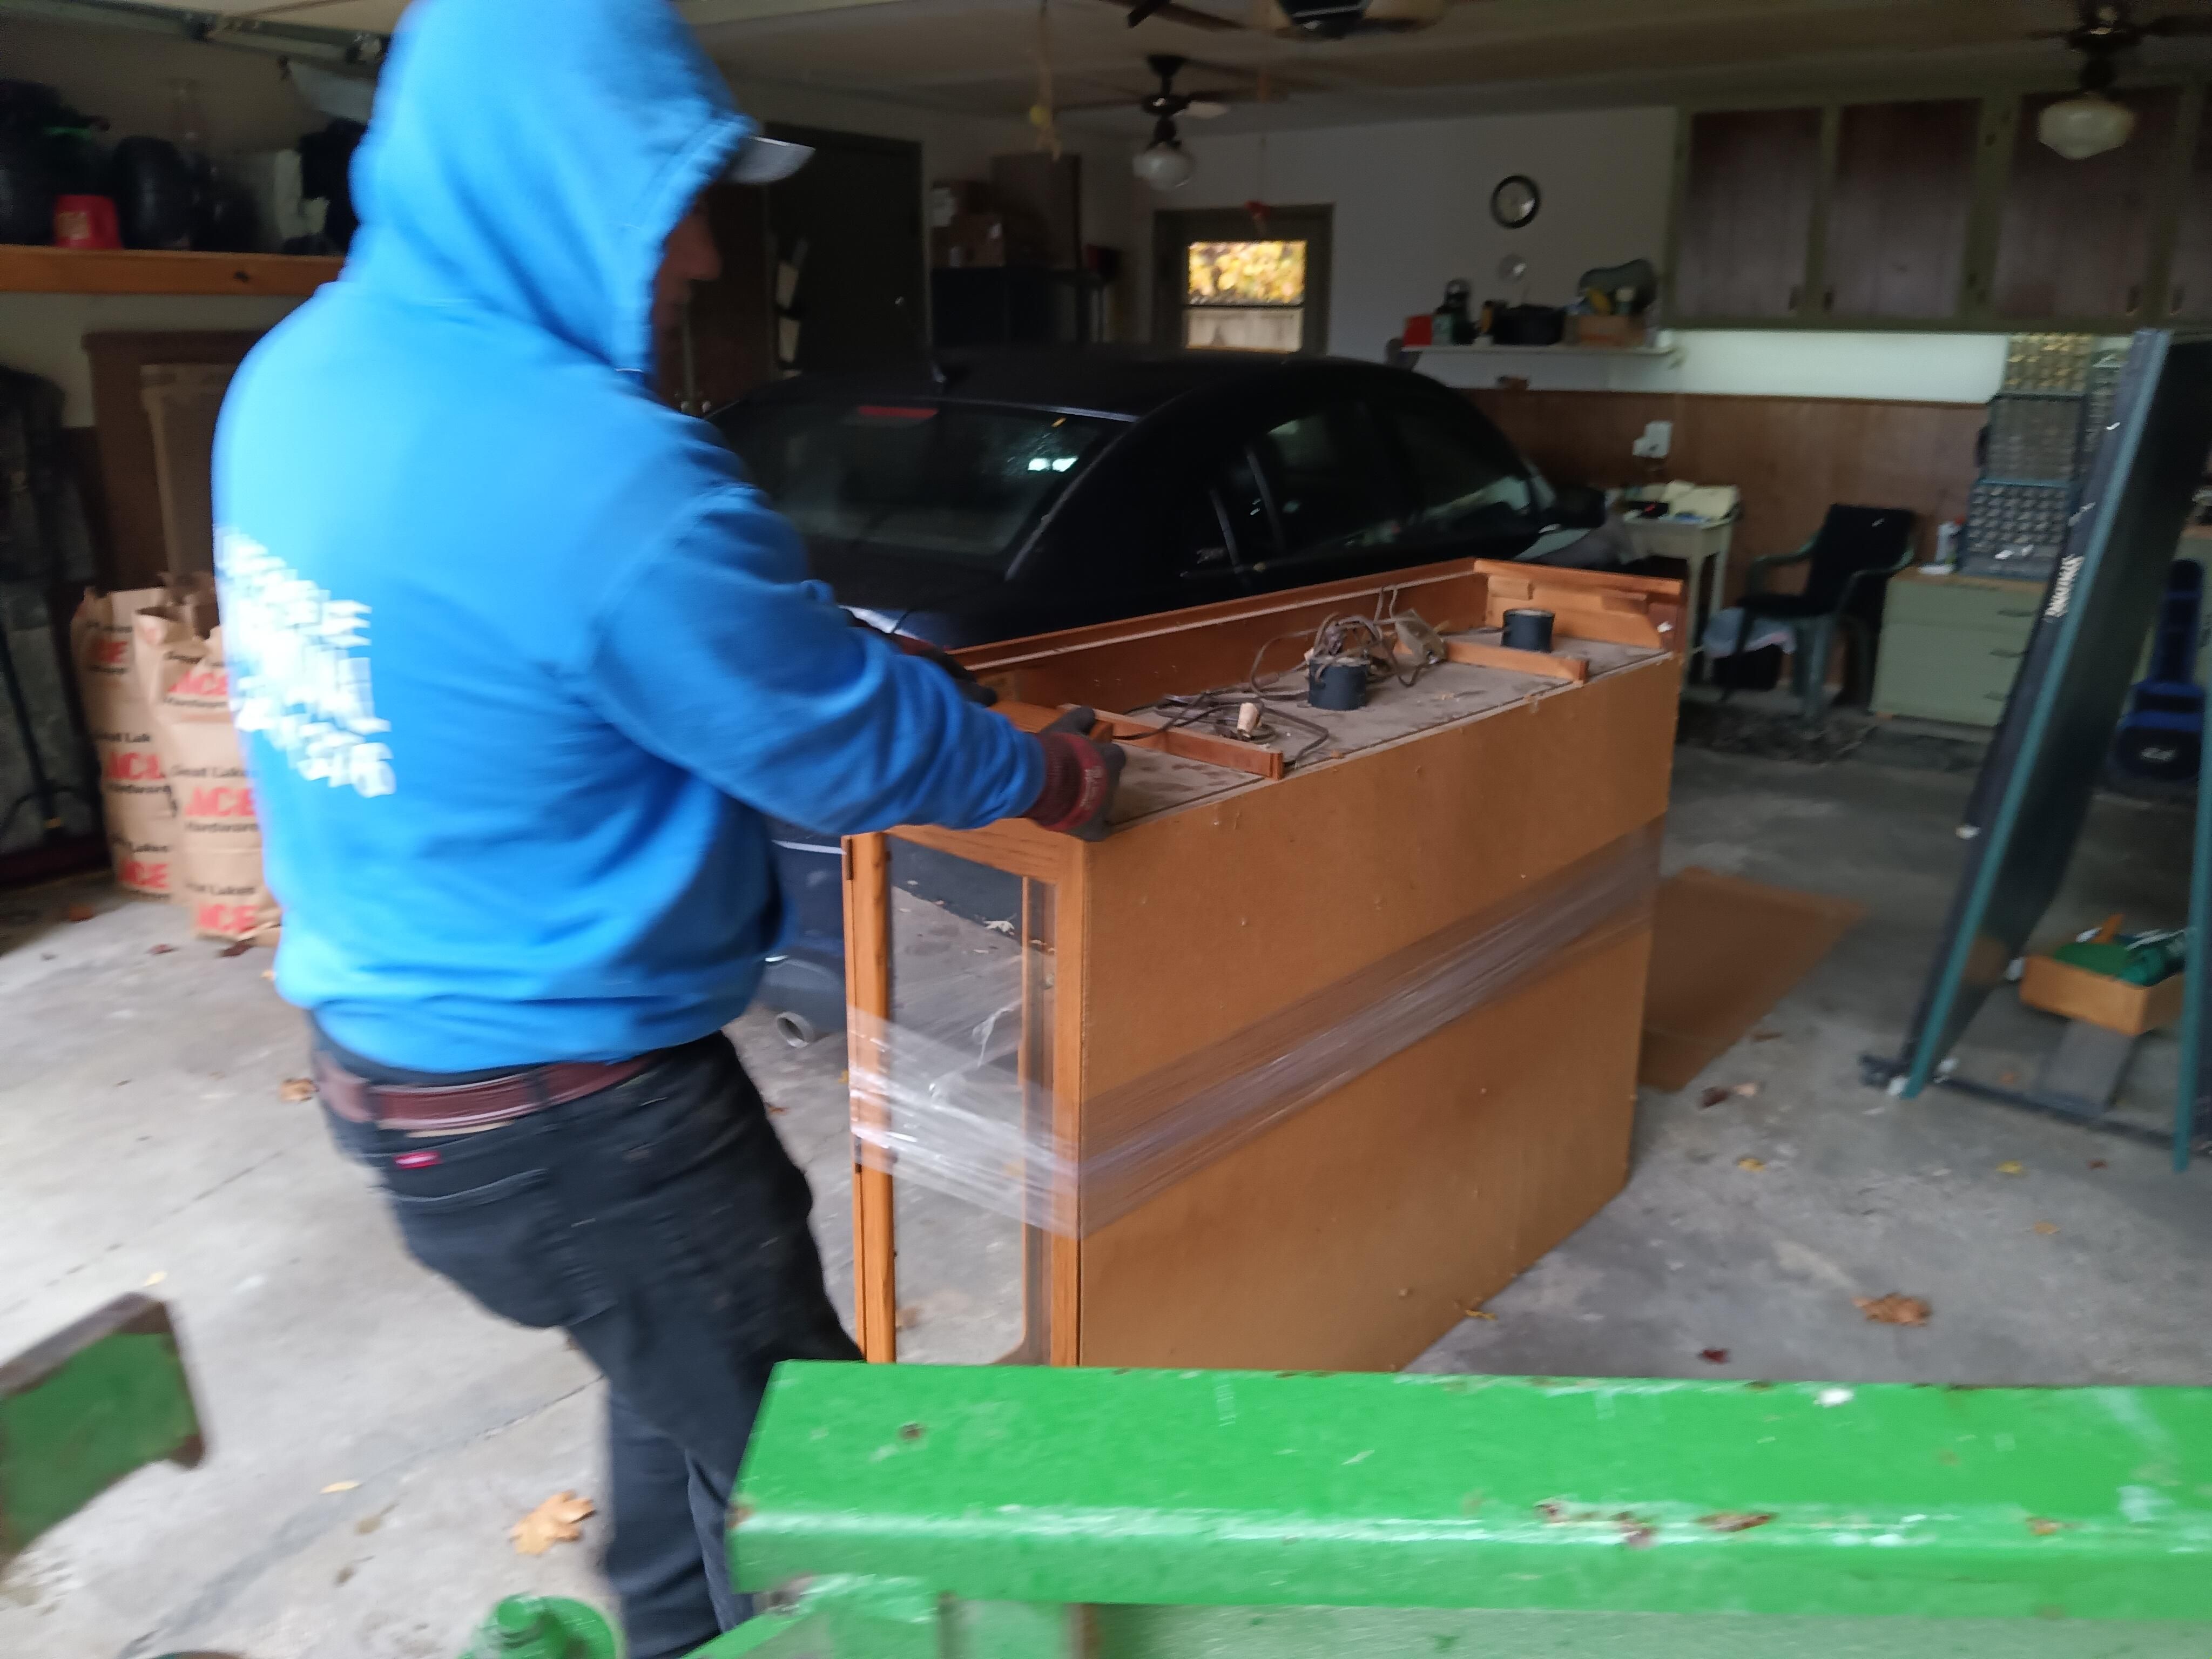 Appliance Removal for Blue Eagle Junk Removal in Oakland County, MI